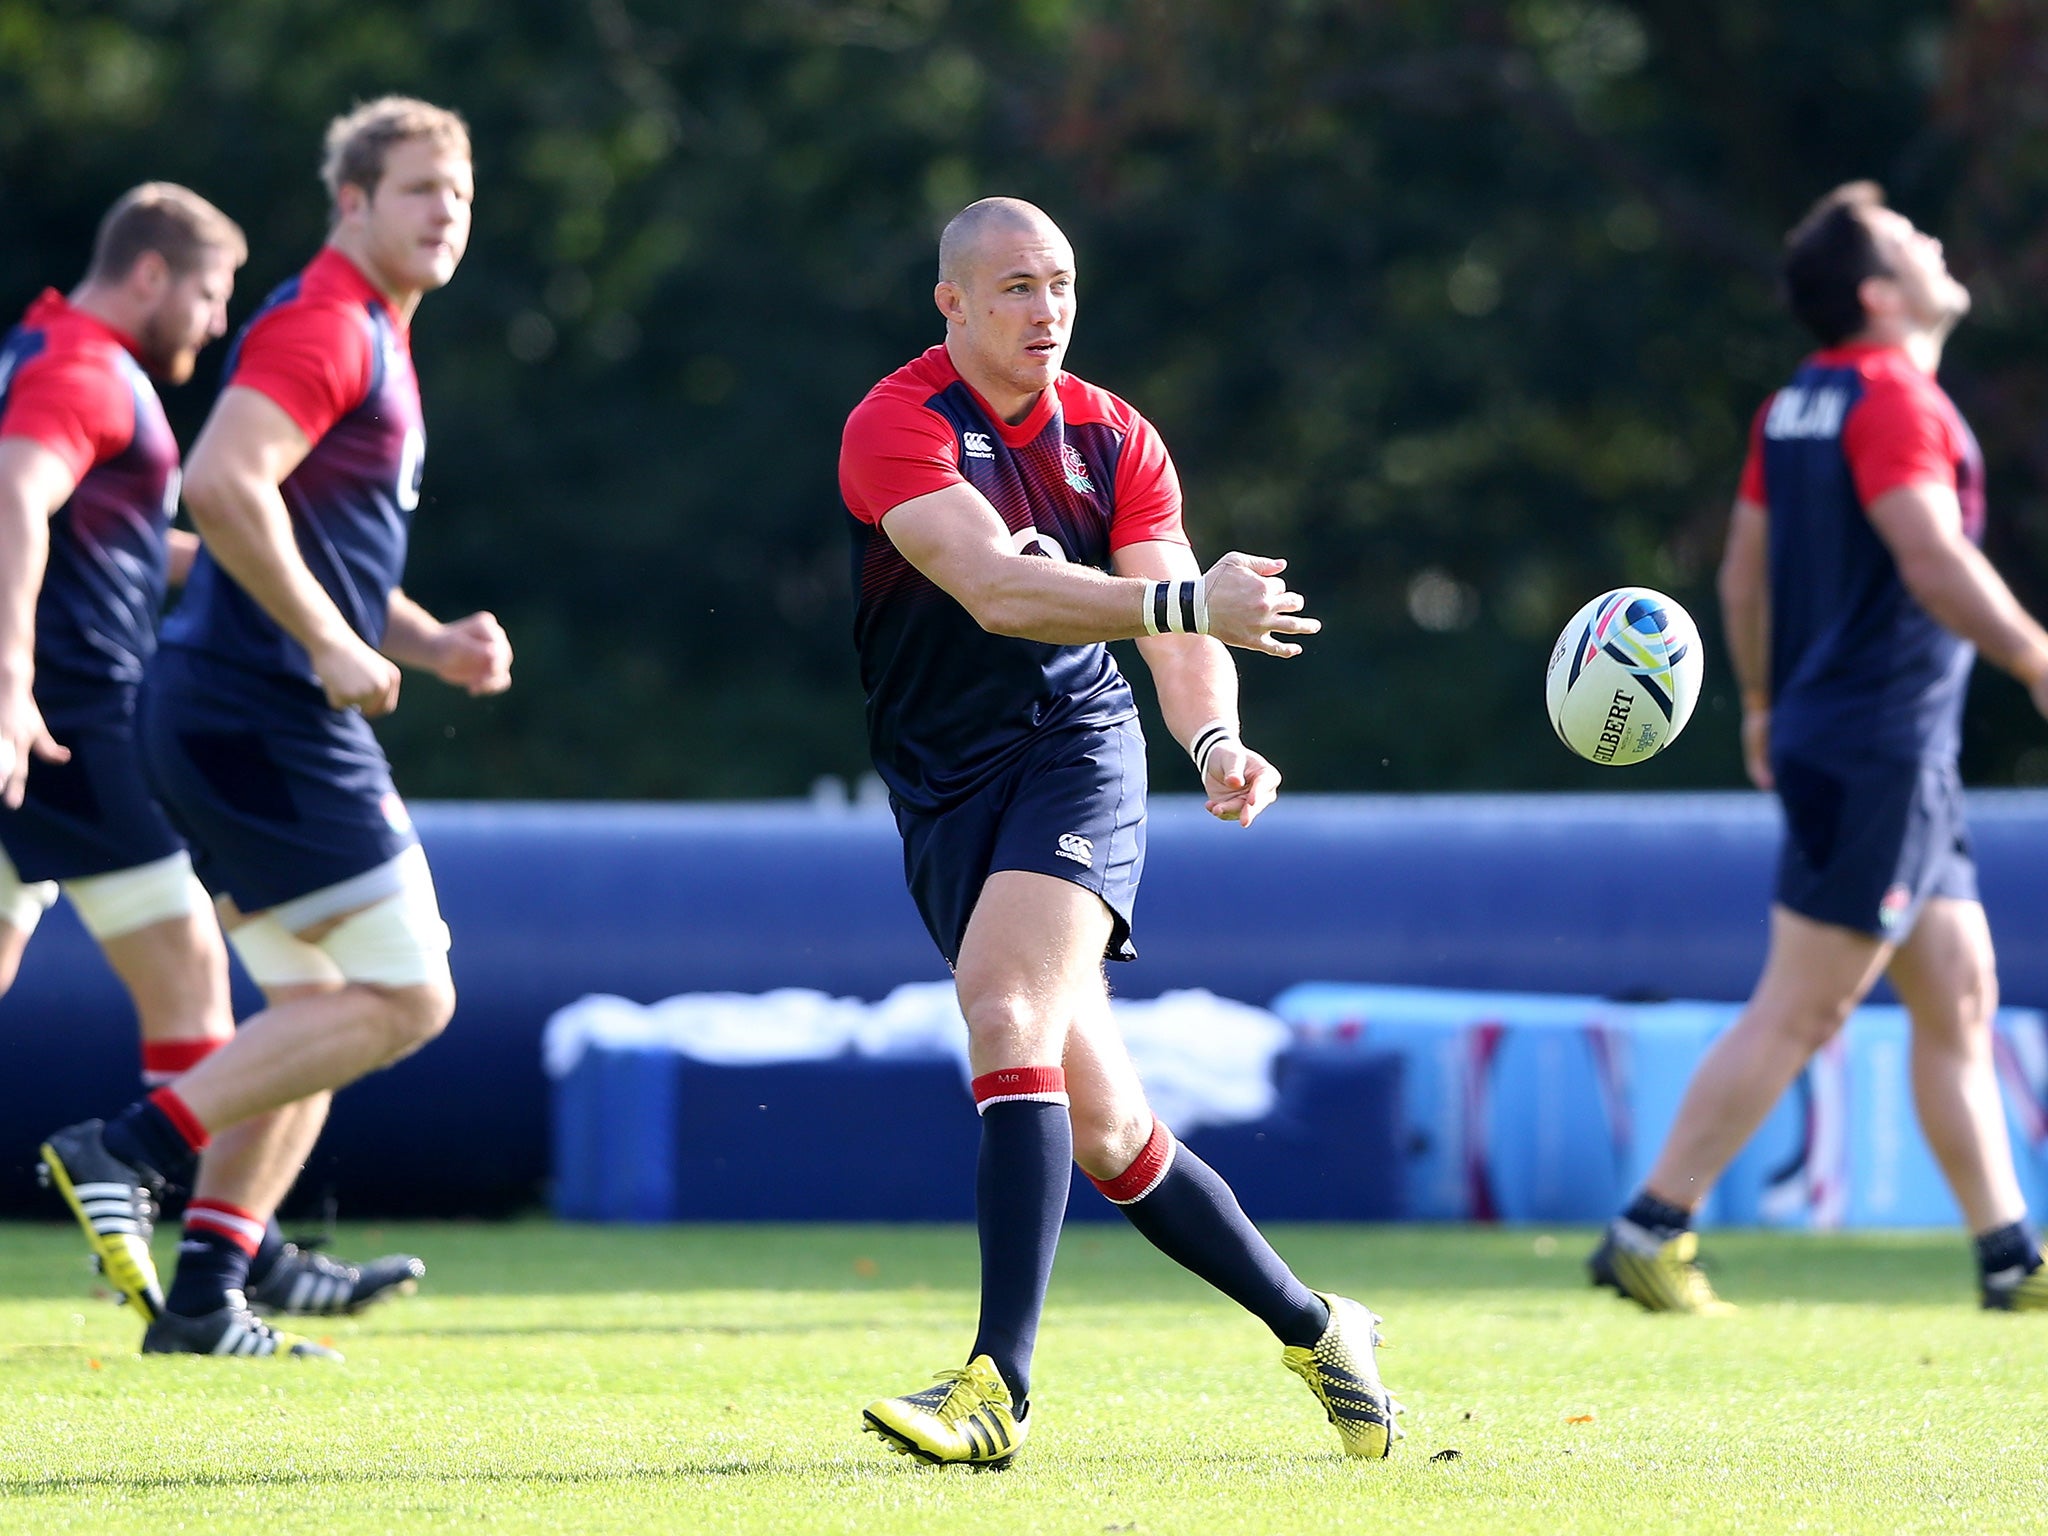 Mike Brown passes the bal during the England training session at Pennyhill Park